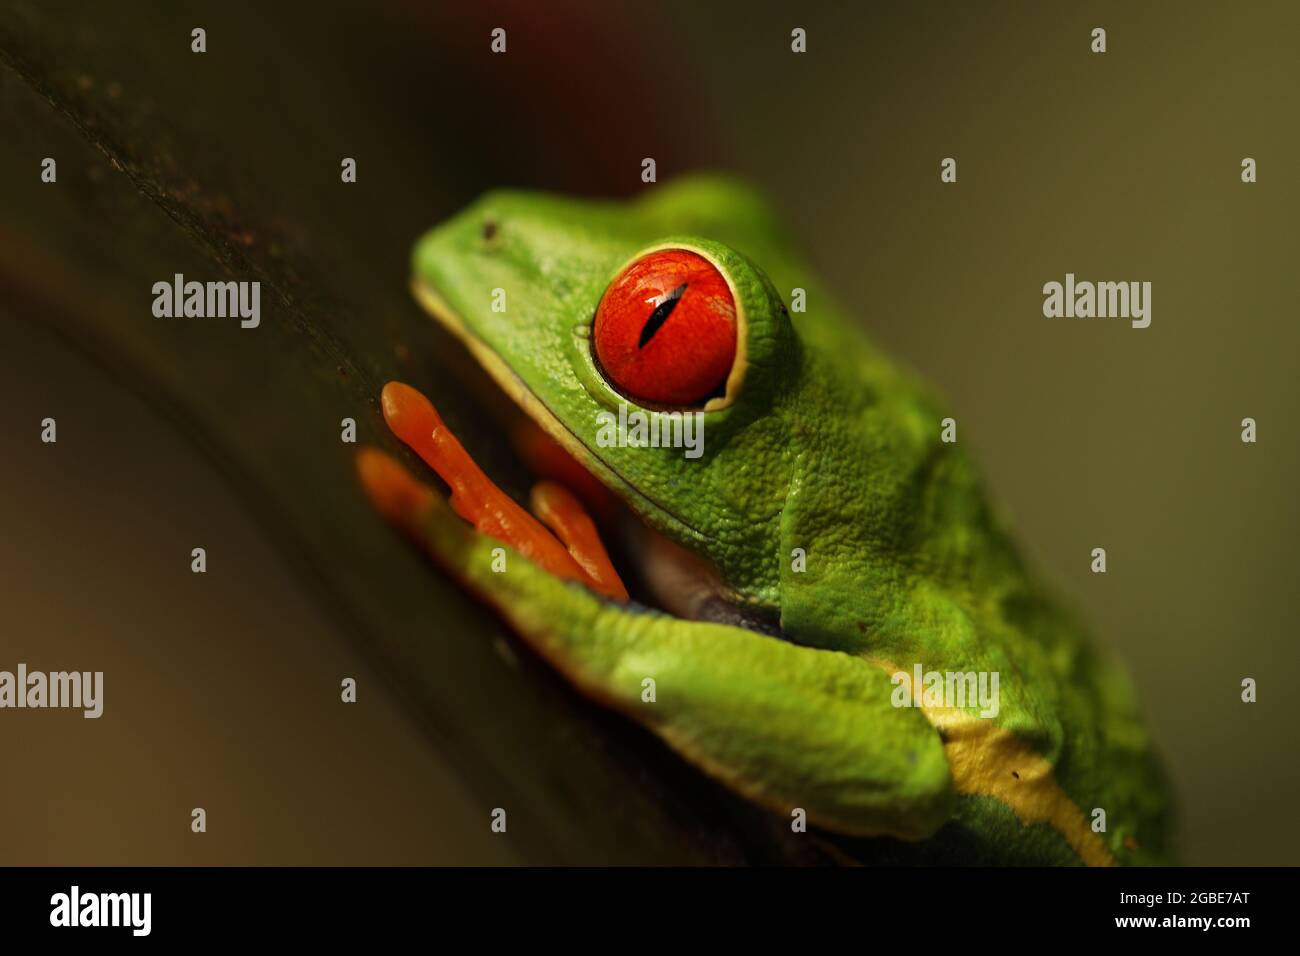 Red eyed tree frog on green leafe in Costa Rica in the tropical rainforest, cute night animal with vivid colors and big eye, agalychnis callidryas Stock Photo